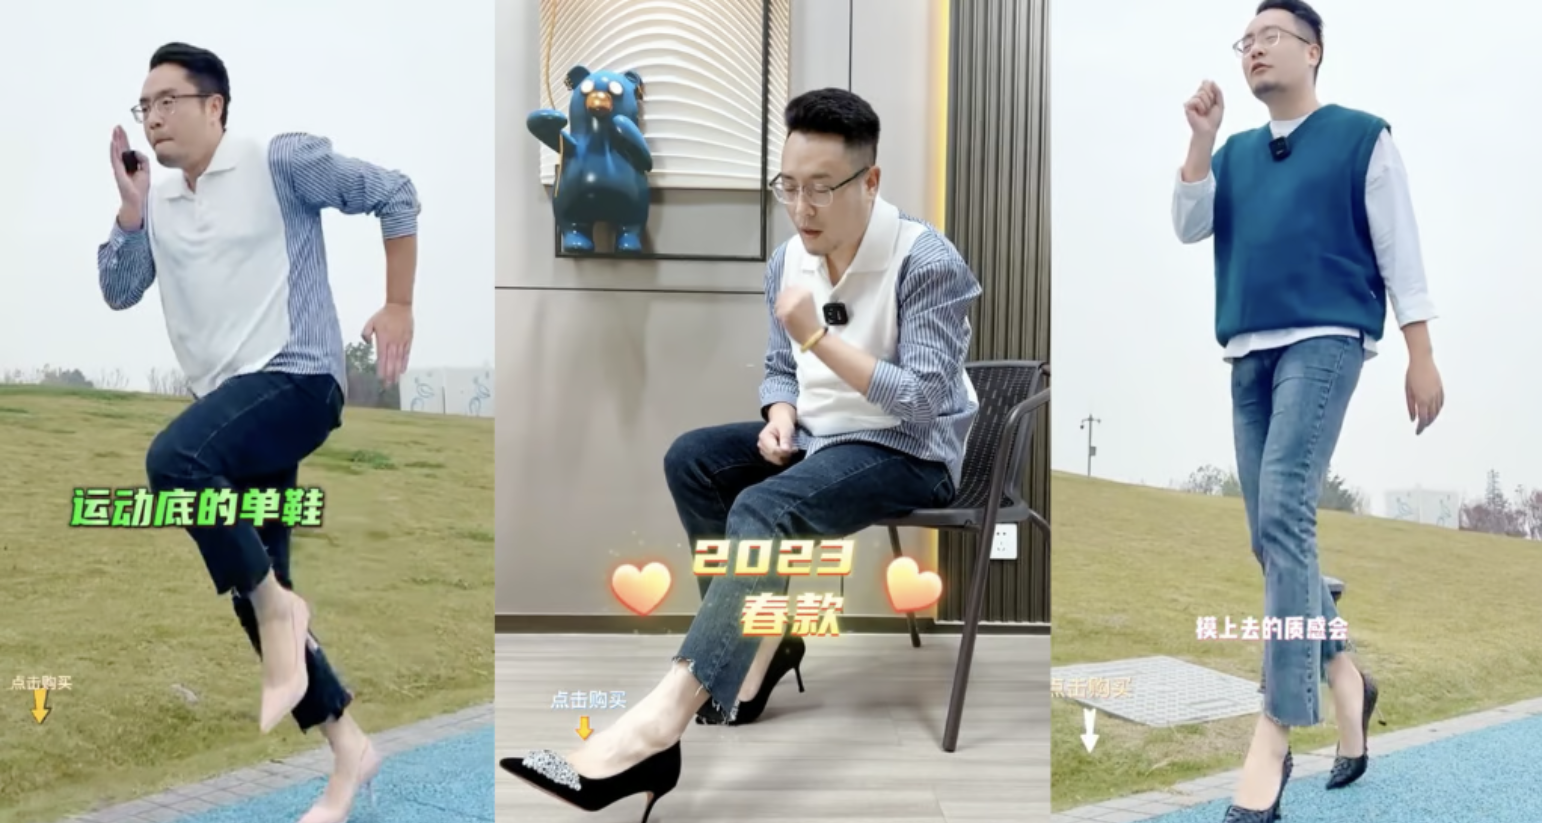 Chinese men take to modeling lingerie on livestreams after China bans  females from doing so -  - News from Singapore, Asia and  around the world